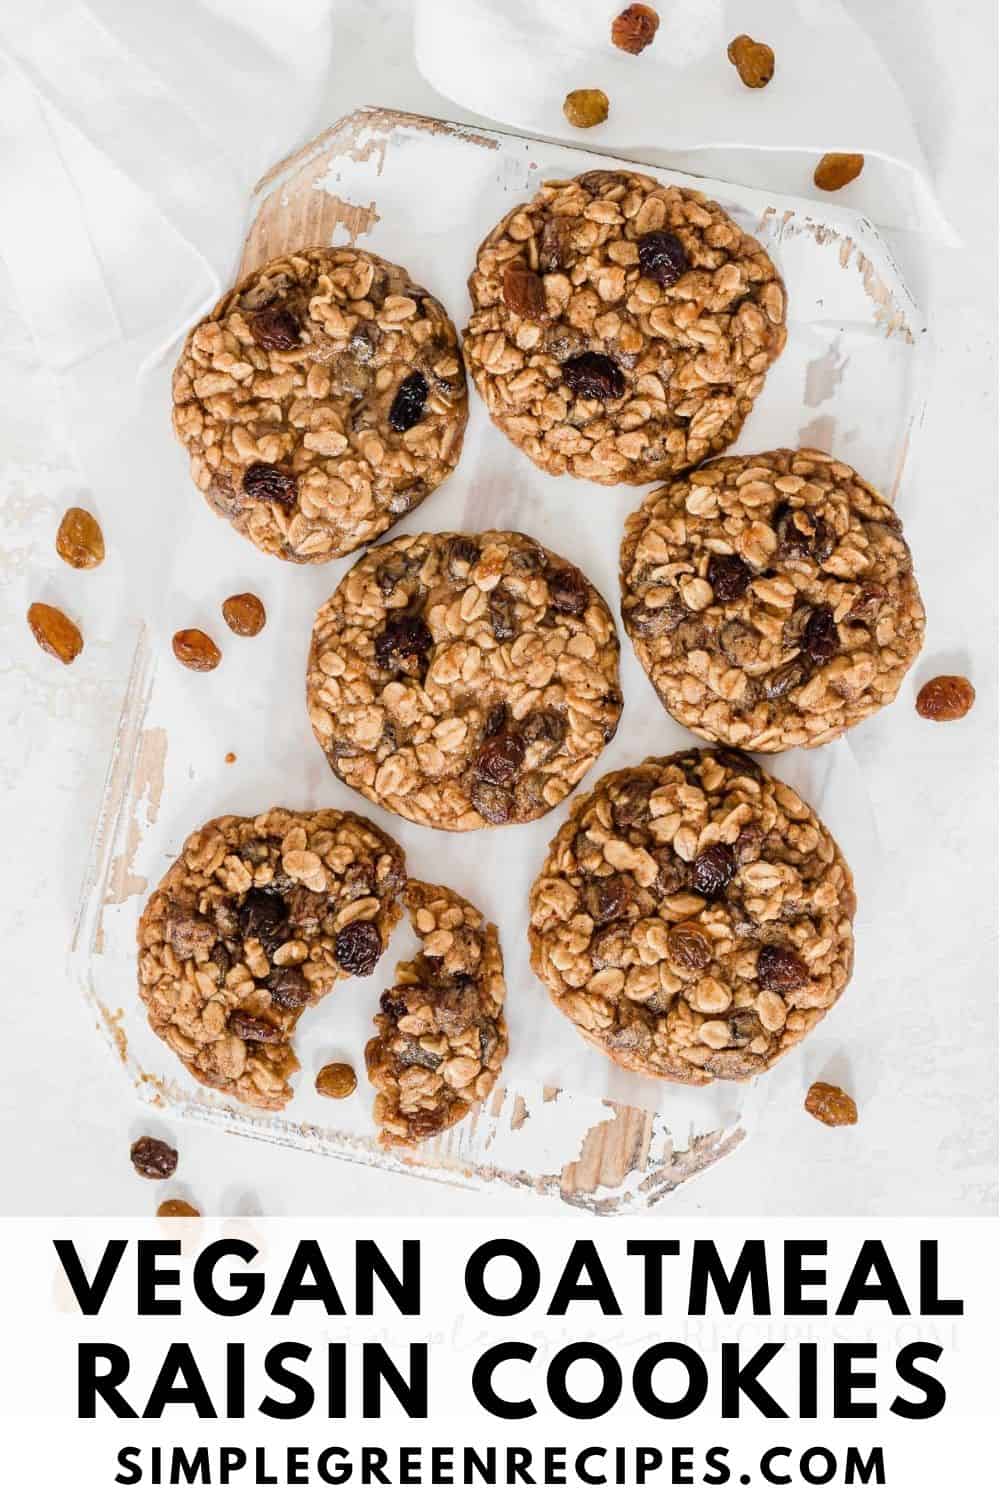 split vegan oatmeal cookie on a white board, surrounded by more cookies